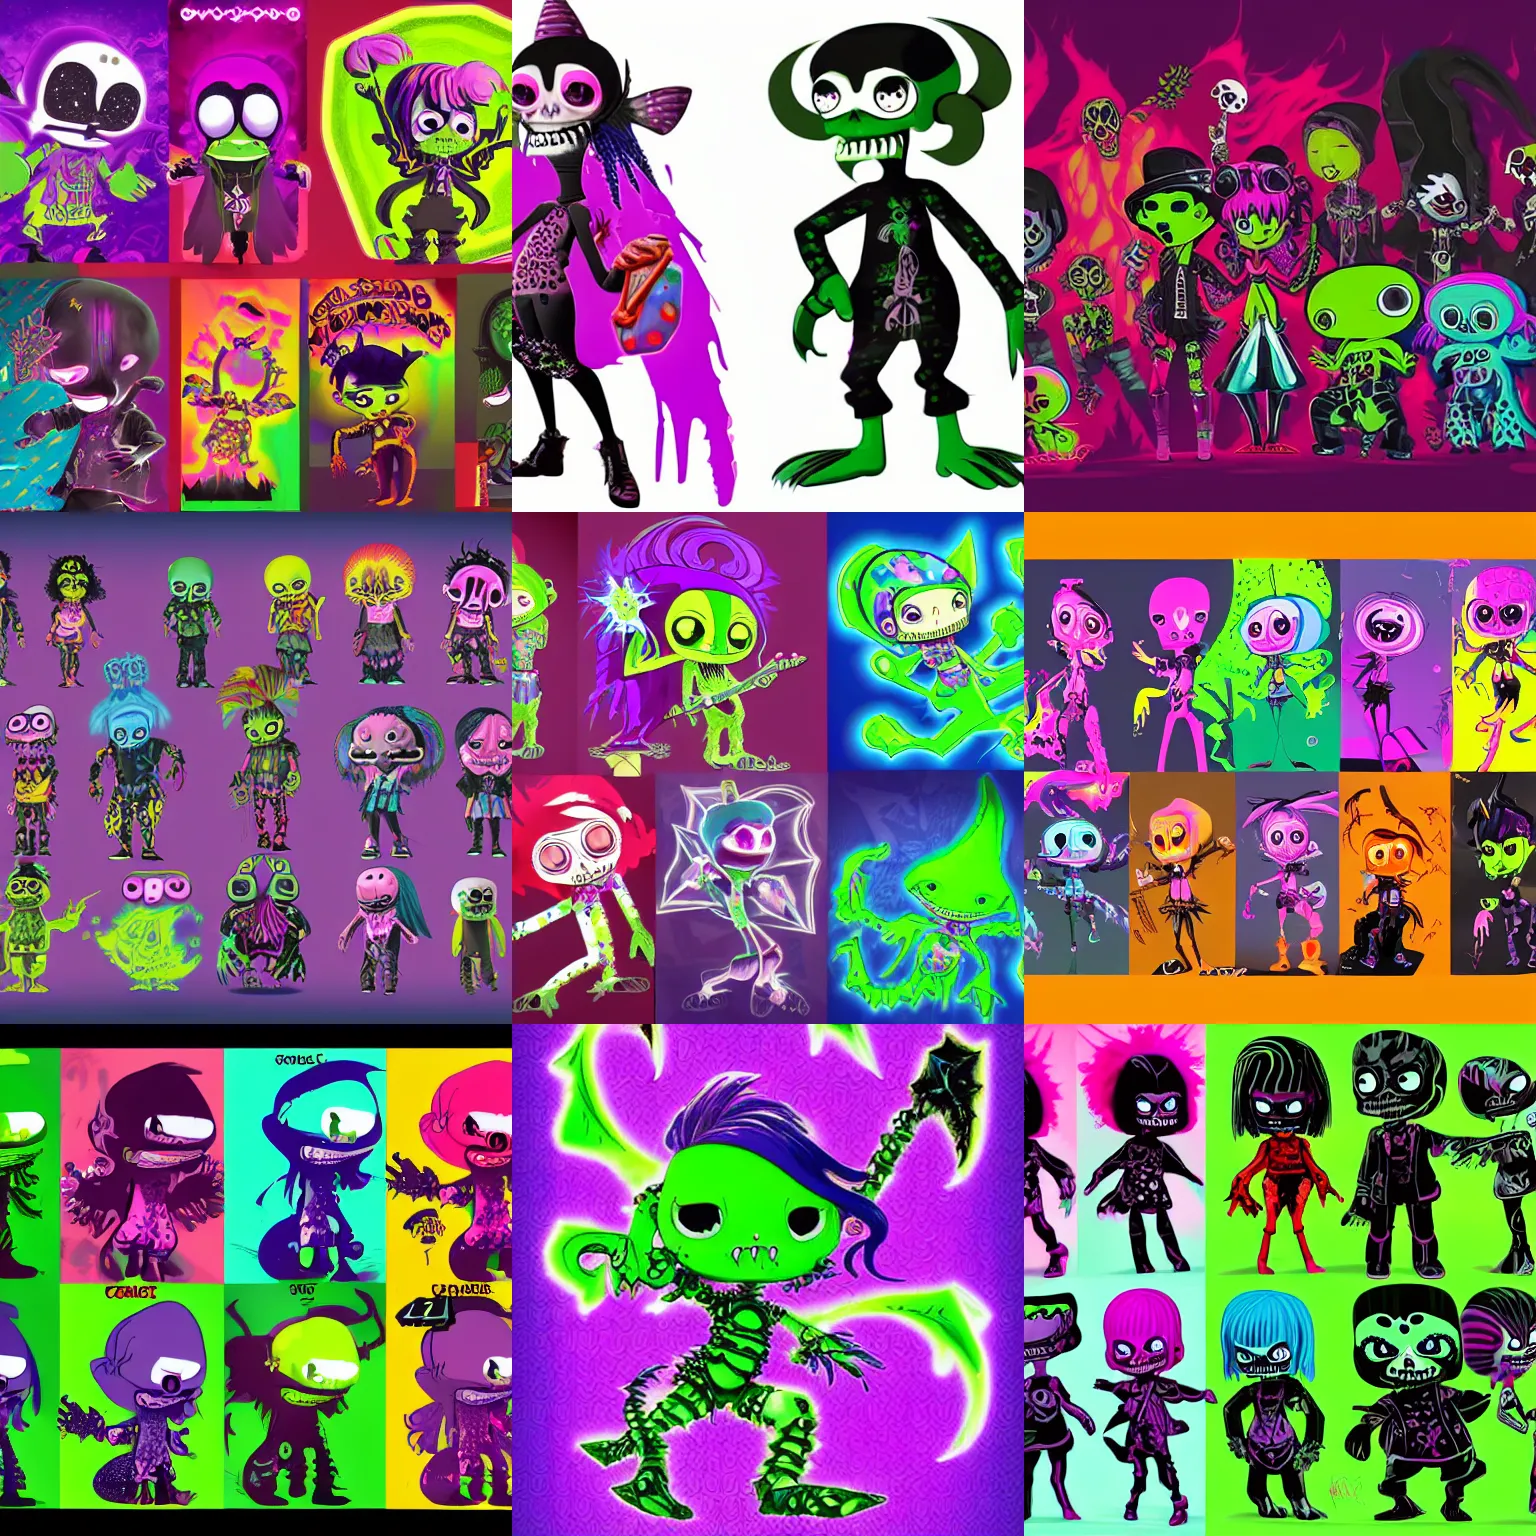 Prompt: CGI lisa frank gothic punk toxic glow in the dark bones vampiric rockstar vampire squid concept character designs of various shapes and sizes by genndy tartakovsky and the creators of fret nice at pieces interactive and splatoon by nintendo for the new psychonauts by doublefines tim shafer managed by pixar and overseen by Jamie Hewlett from gorillaz